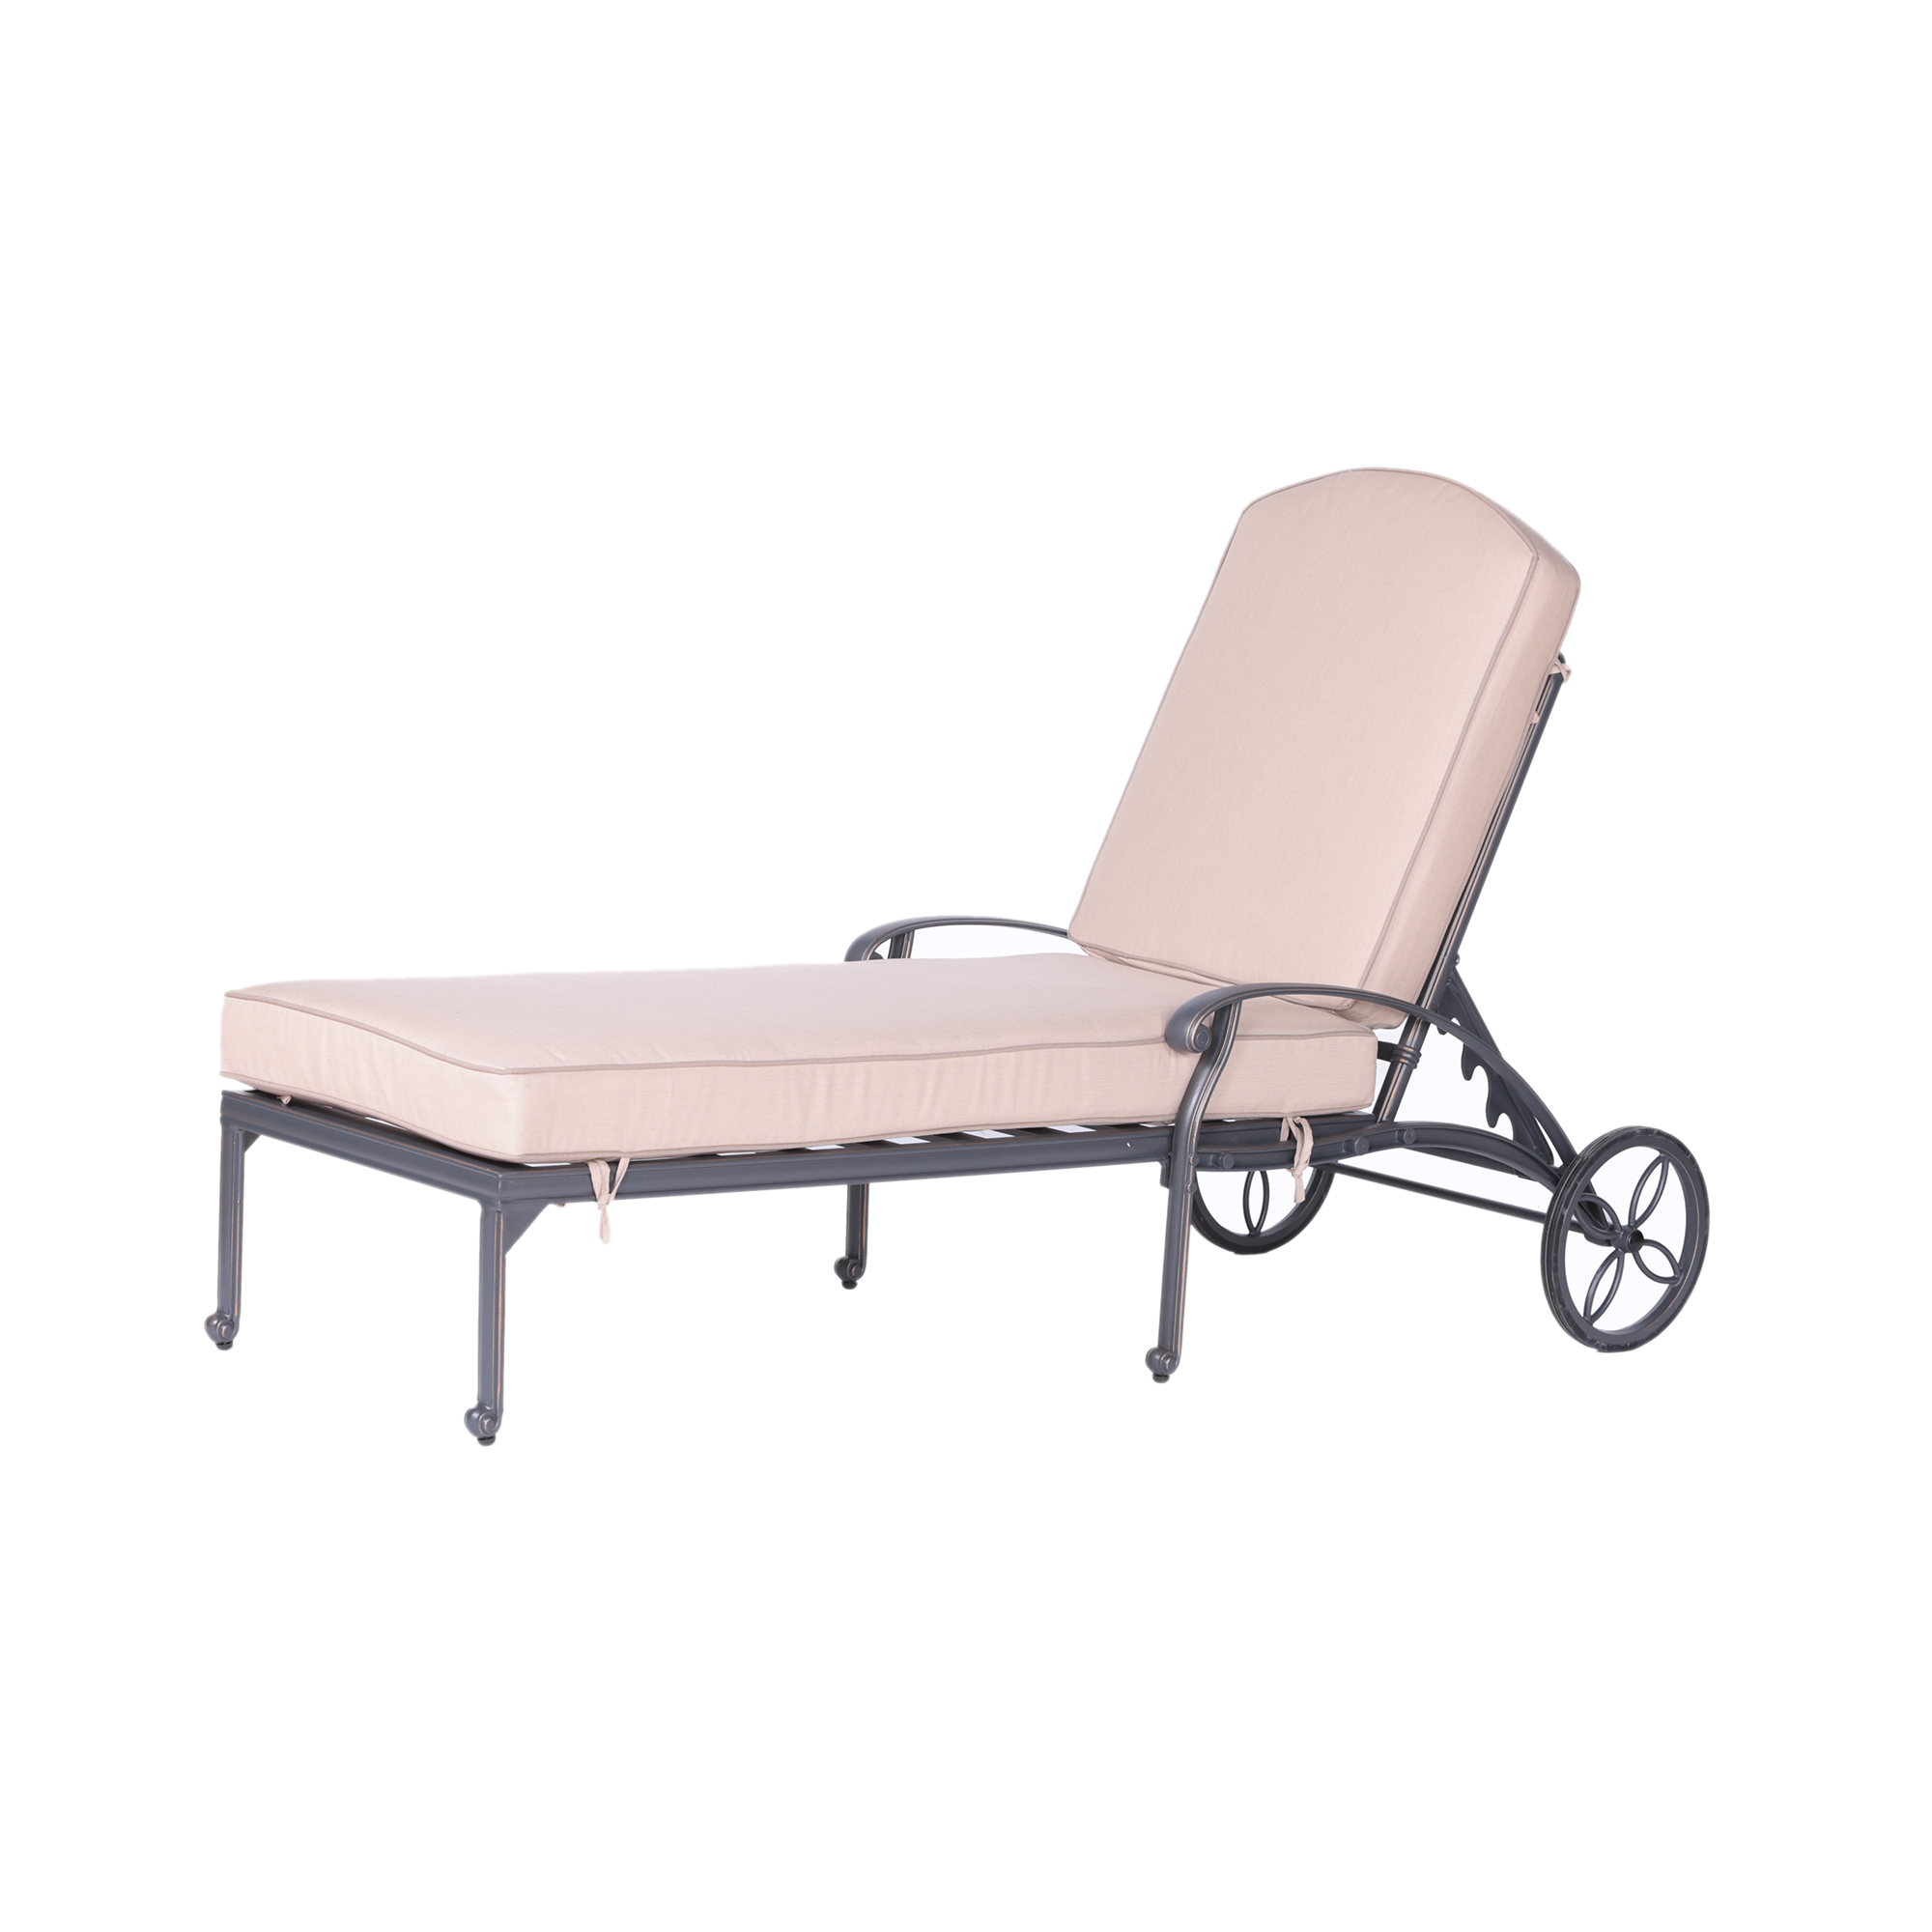 Chaise Lounger, Spectrum Sand